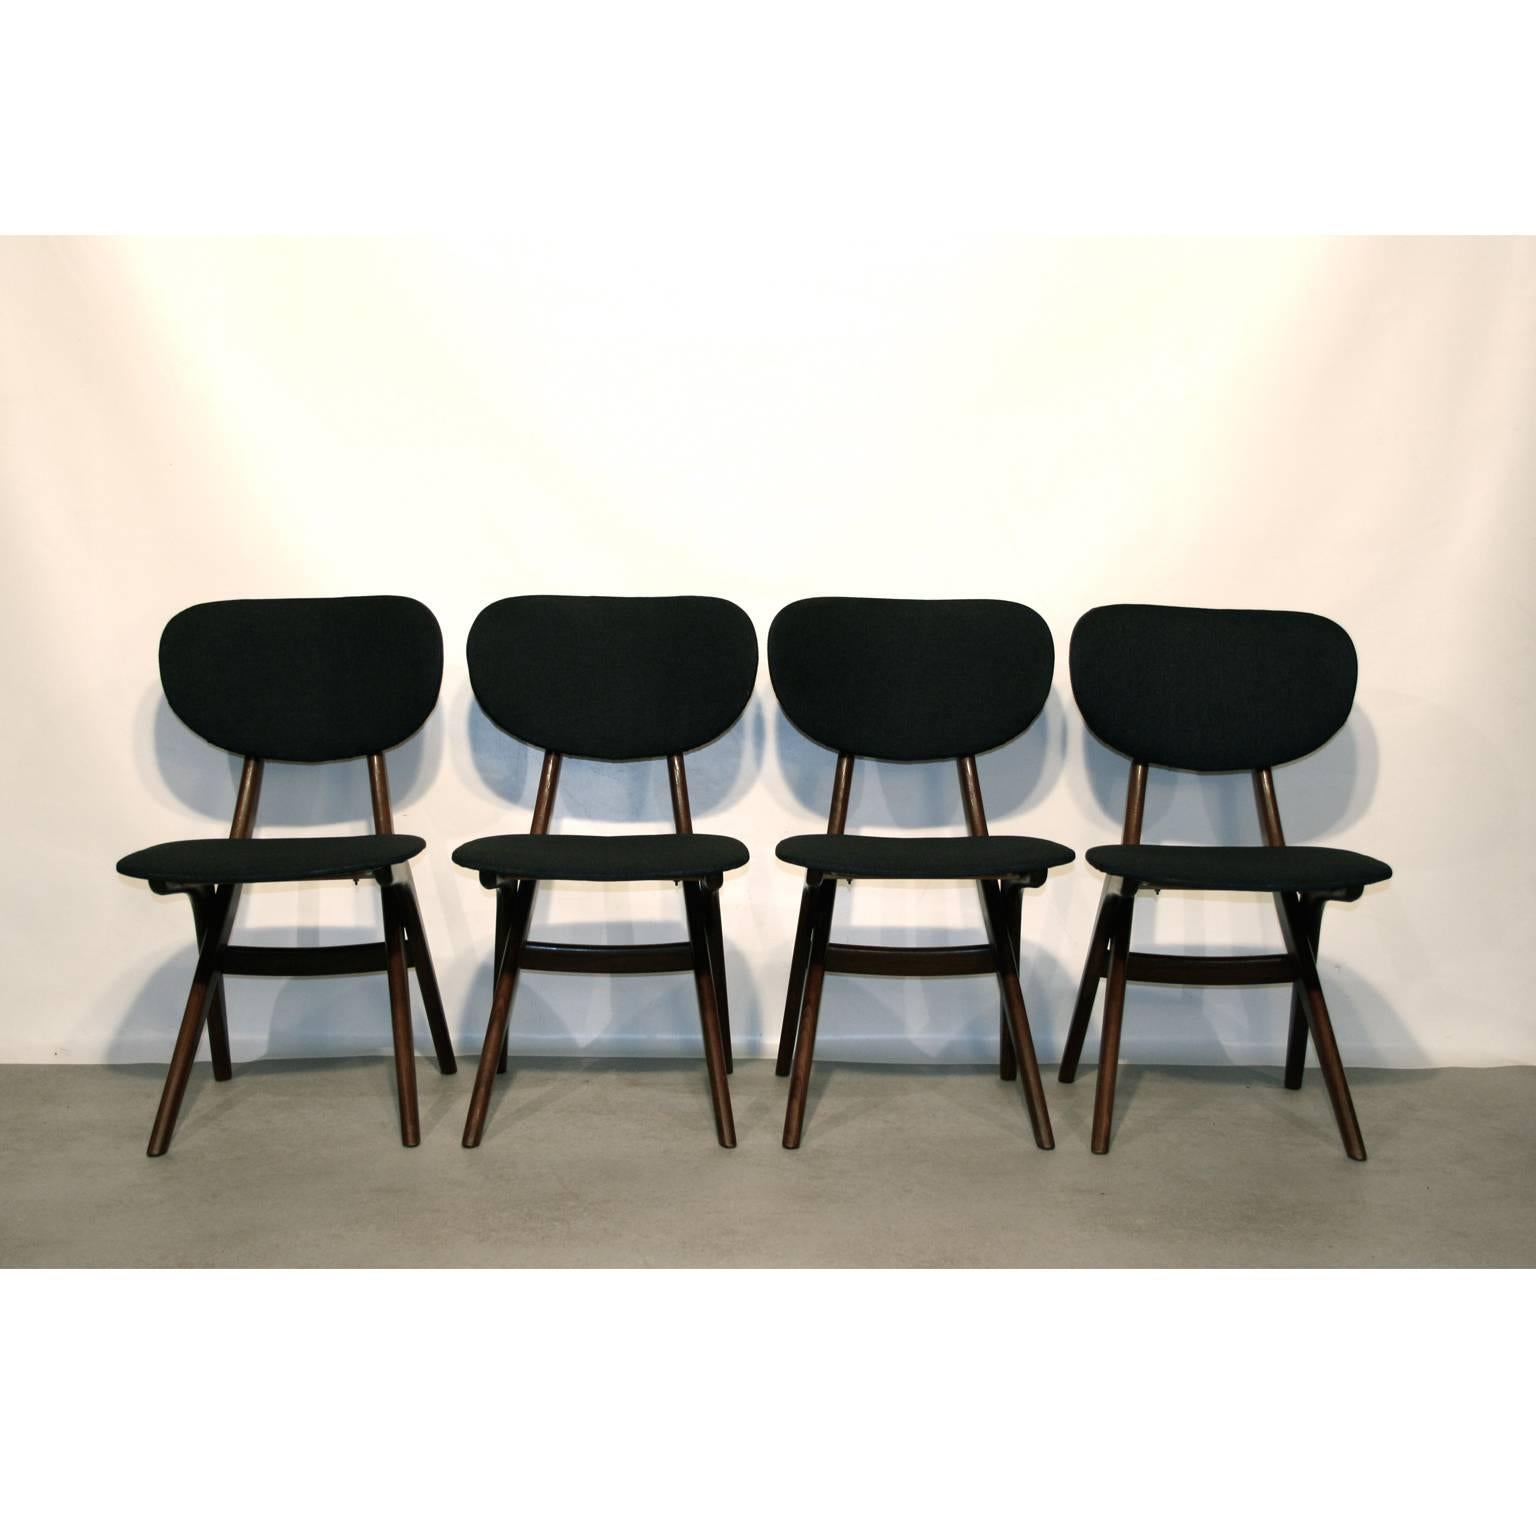 Dining chairs by Louis Van Teeffelen for Wébé, Dutch design, 1950s

Teak dining chairs with black wool upholstery.

These chairs are made by Wébé the Netherlands. Wébé was a Dutch furniture producer with Louis Van Teeffelen as their most famous